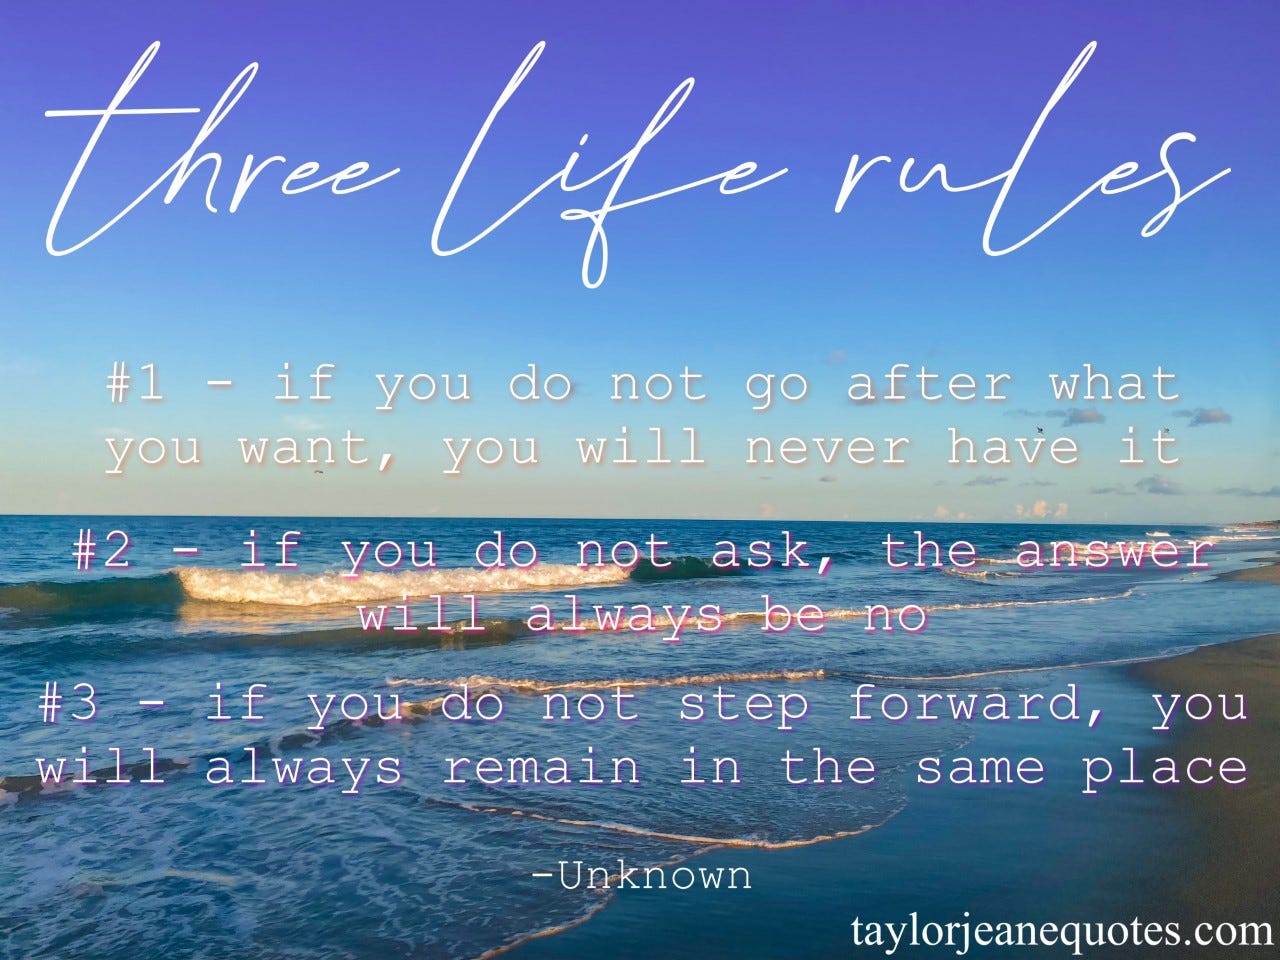 taylor jeane quotes, taylor jeane, taylor wilson, inspirational quotes, motivational quotes, life rules quotes, quote of the day august 1 2022, three life rules, 3 life rules, rules quotes, go for it quotes, determination quotes, goal quotes, yolo quotes,you only live once quotes, don't ask for permission quotes, try new things quotes, spontaneity quotes, goal quotes, life quotes, best quotes, quotes to live by, do it quotes, push quotes, push yourself quotes